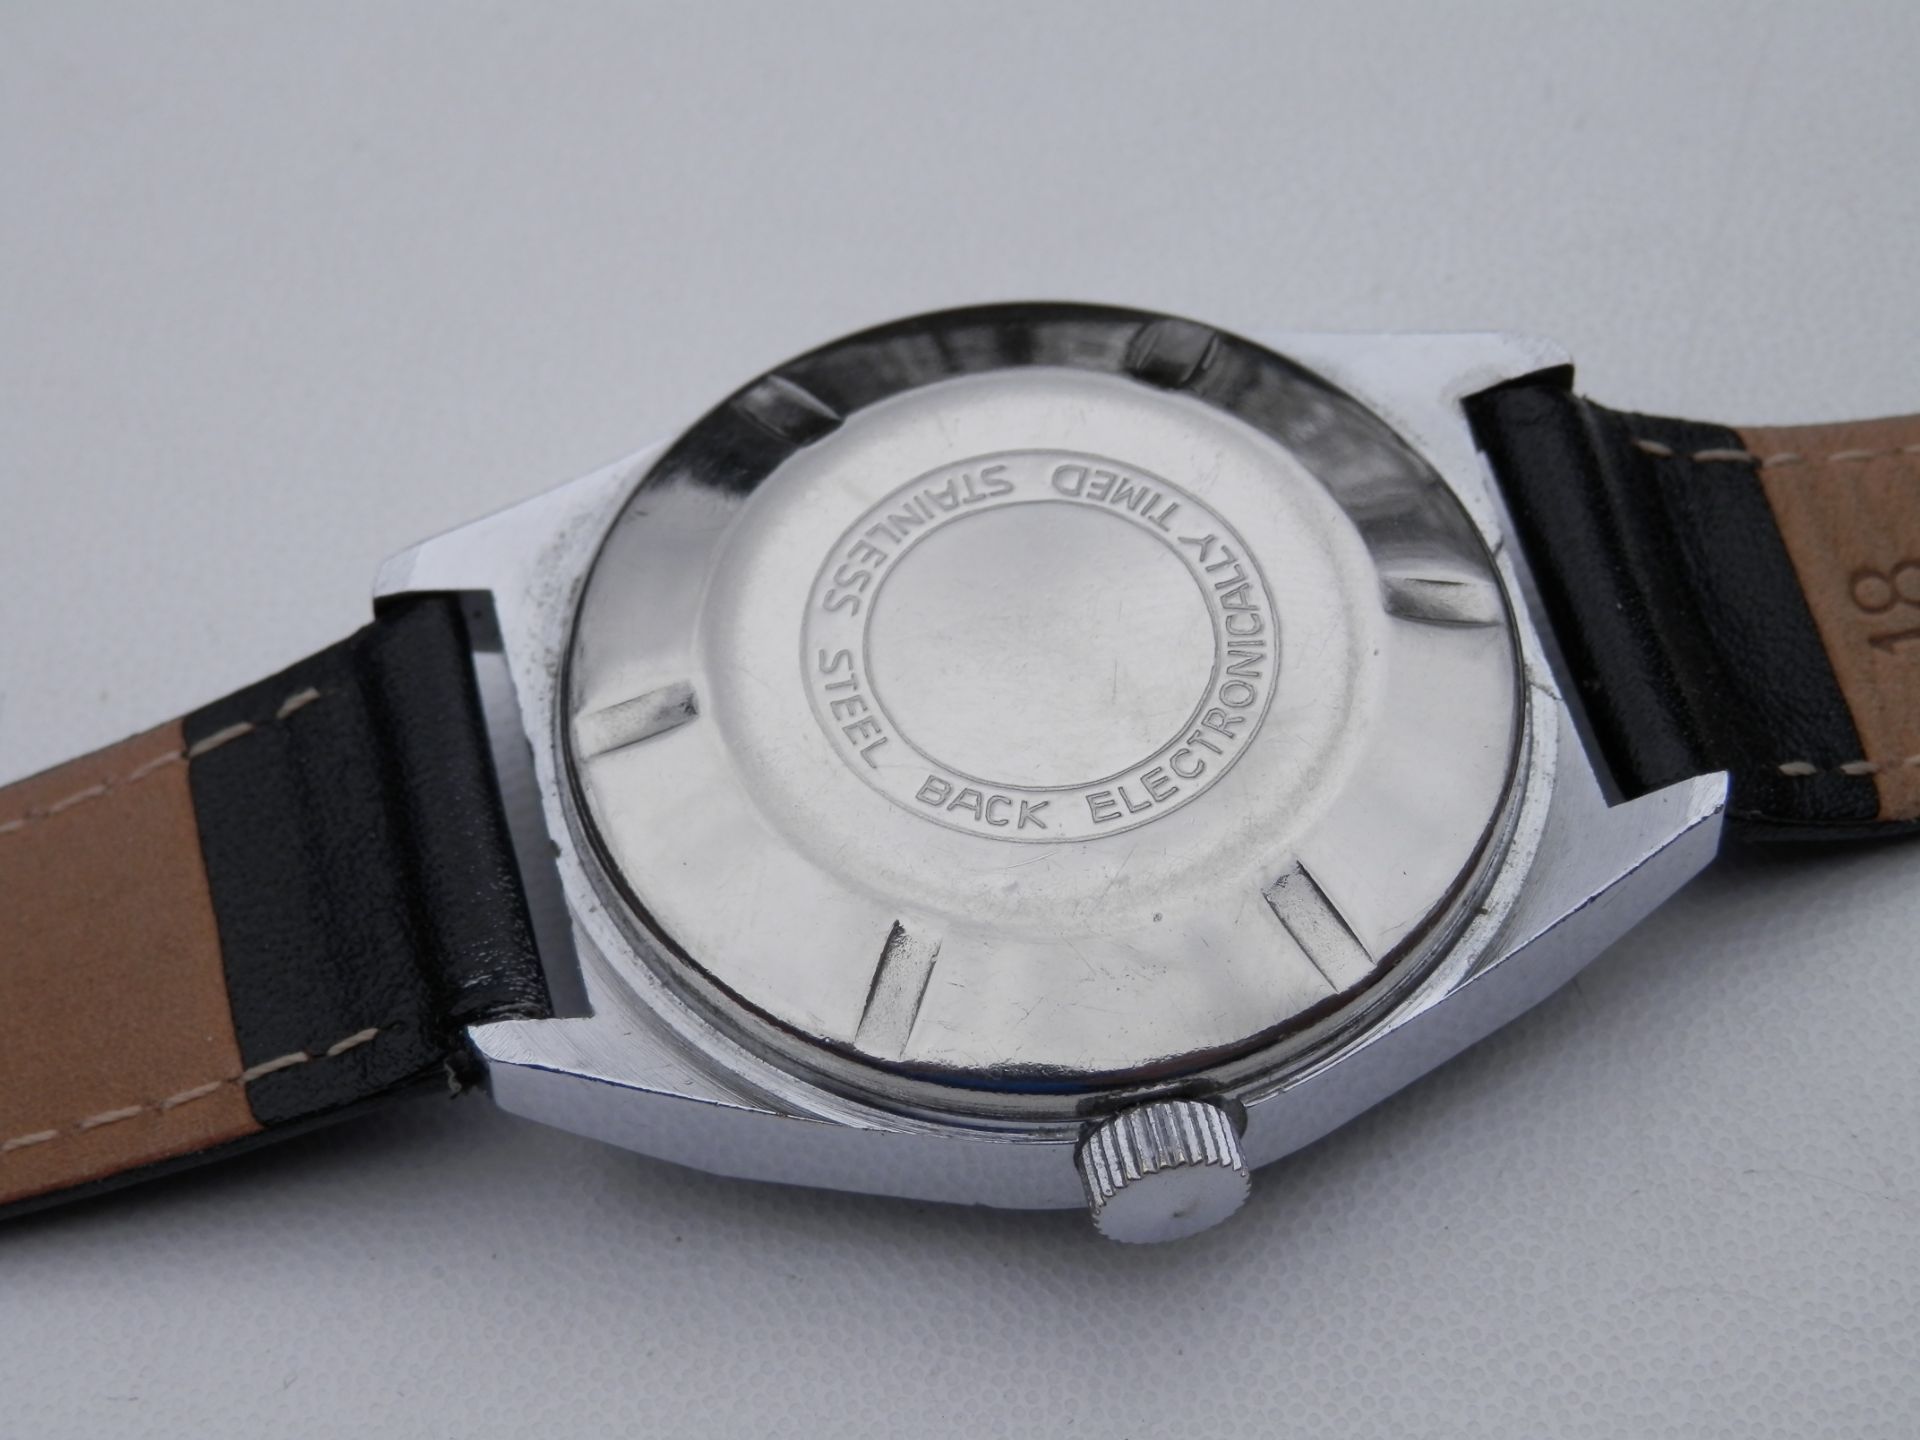 SUPERB RARE GENTS 1960S GERMAN MADE MEISTER ANKER HAND WIND DATE WATCH. - Image 7 of 10